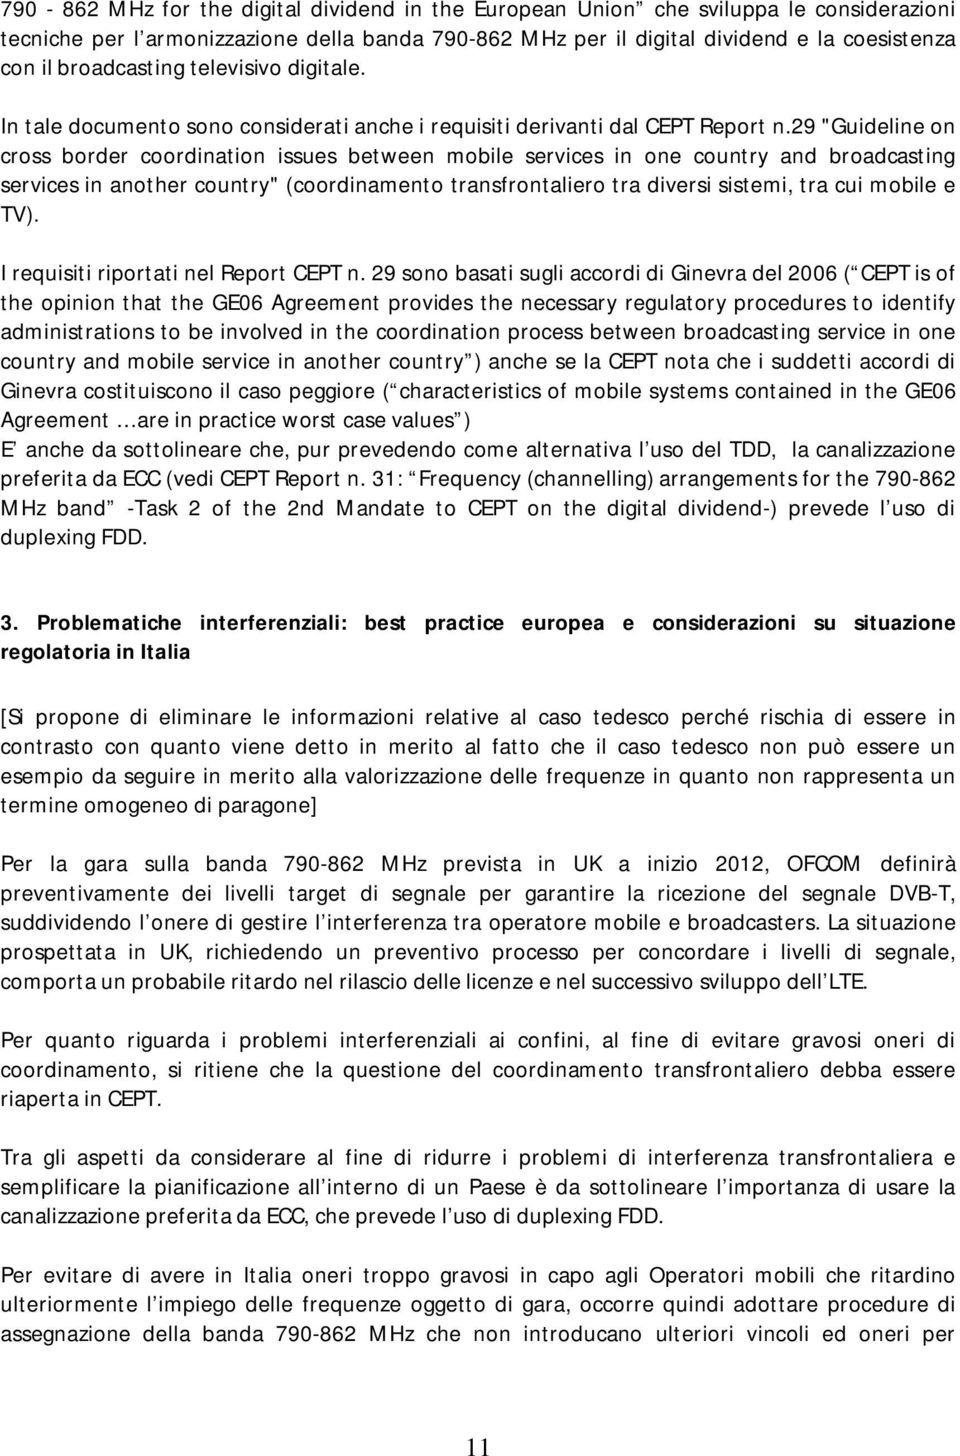 29 "Guideline on cross border coordination issues between mobile services in one country and broadcasting services in another country" (coordinamento transfrontaliero tra diversi sistemi, tra cui